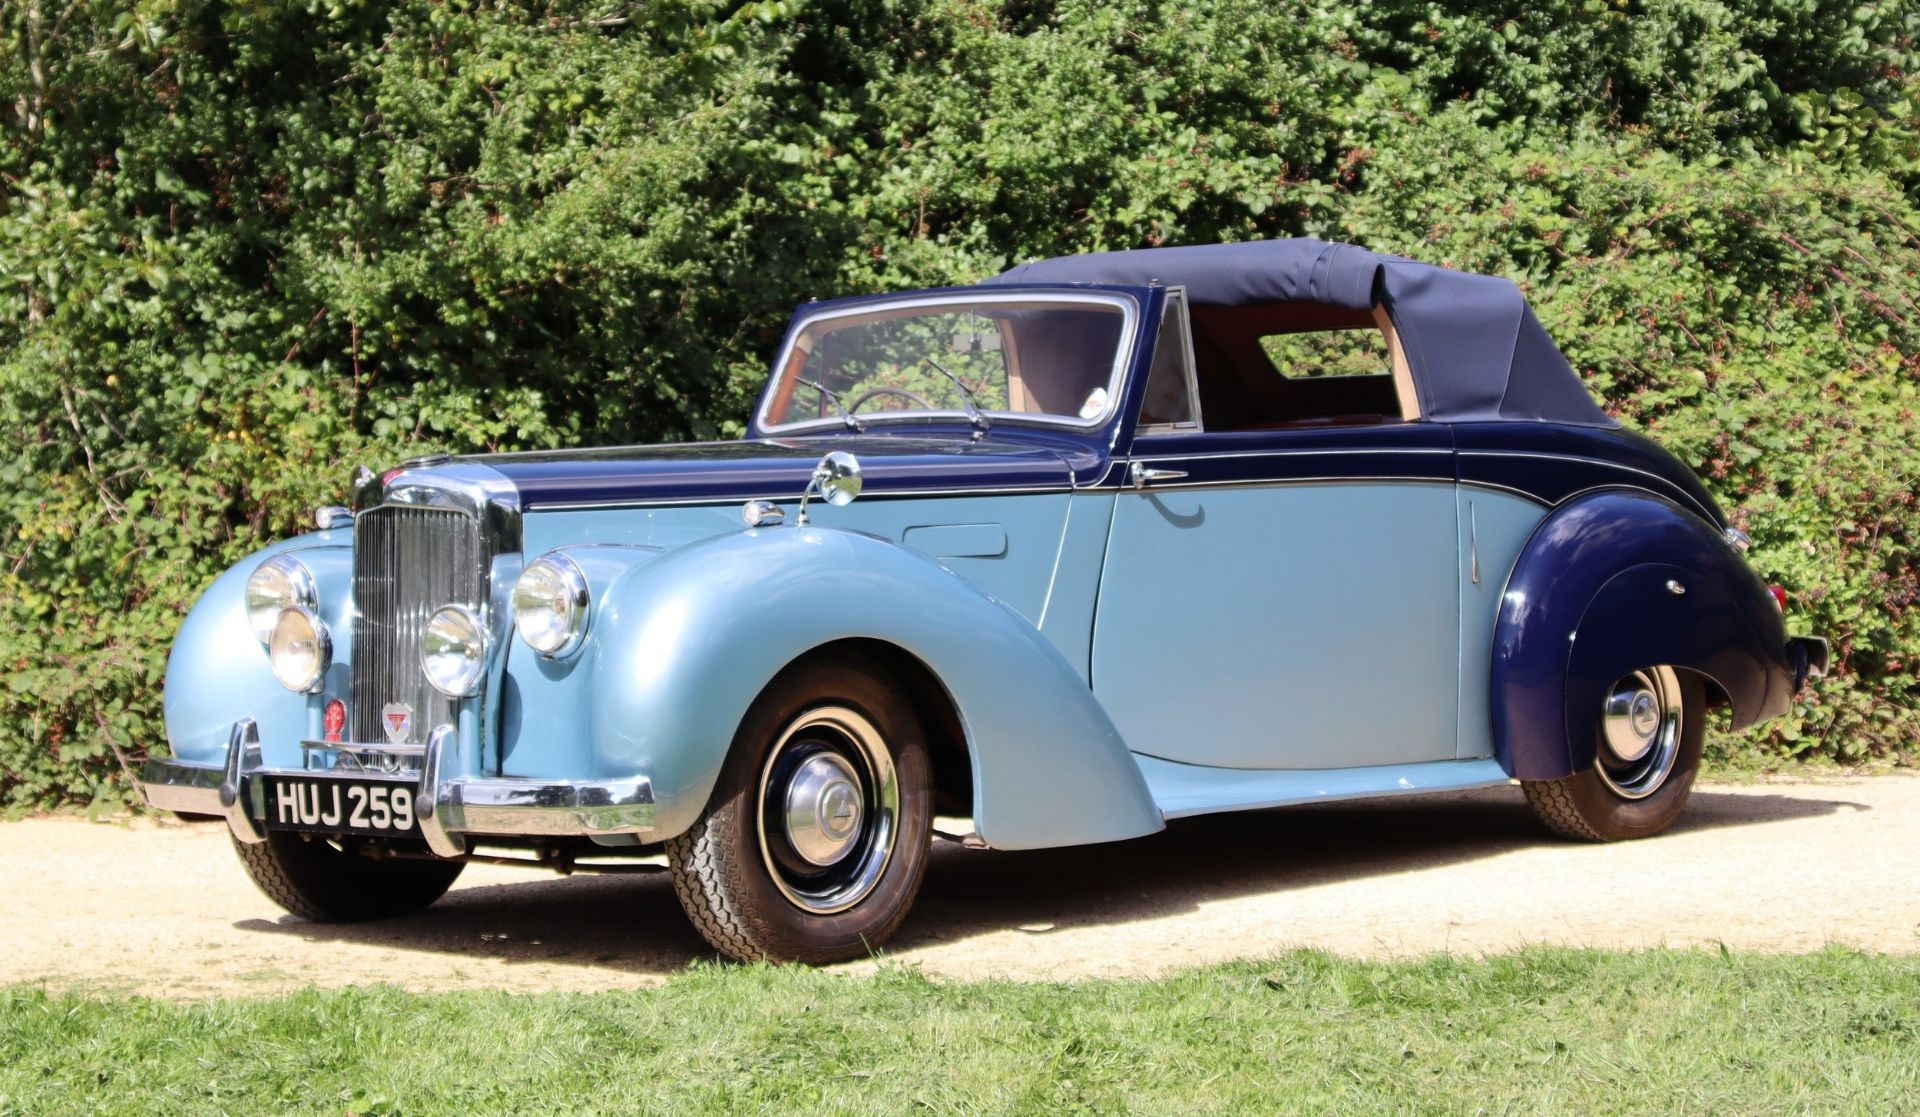 1952 ALVIS TA21 THREE-POSITION DROPHEAD COUPE Registration Number: HUJ 259 Chassis Number: 24489 - Image 7 of 44